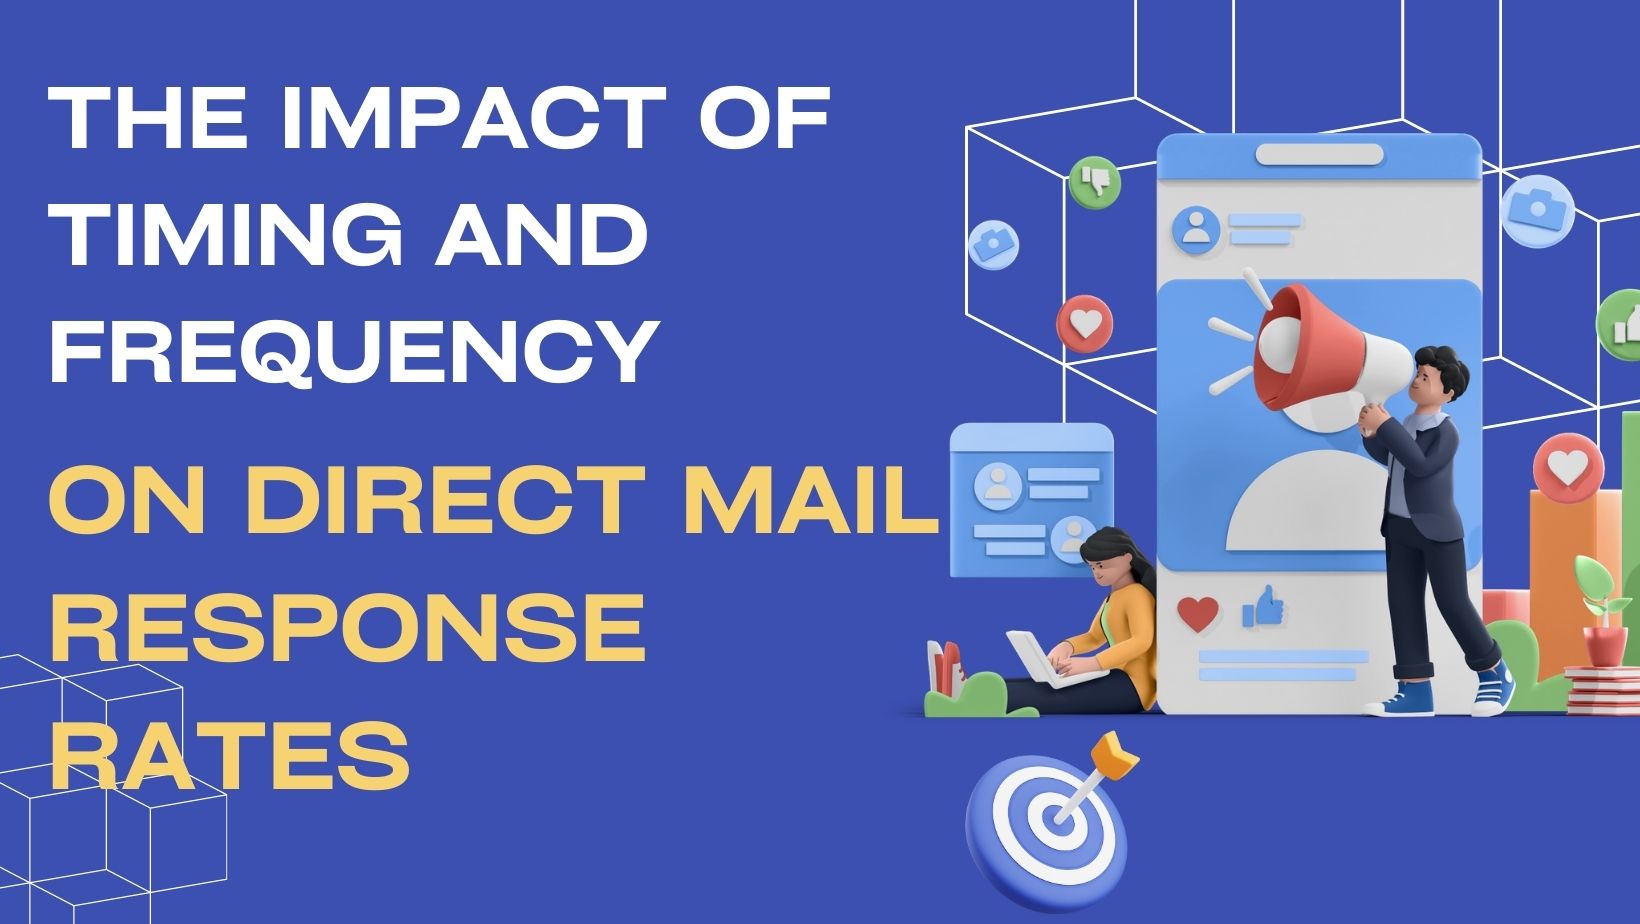 The Impact of Timing and Frequency on Direct Mail Response Rates